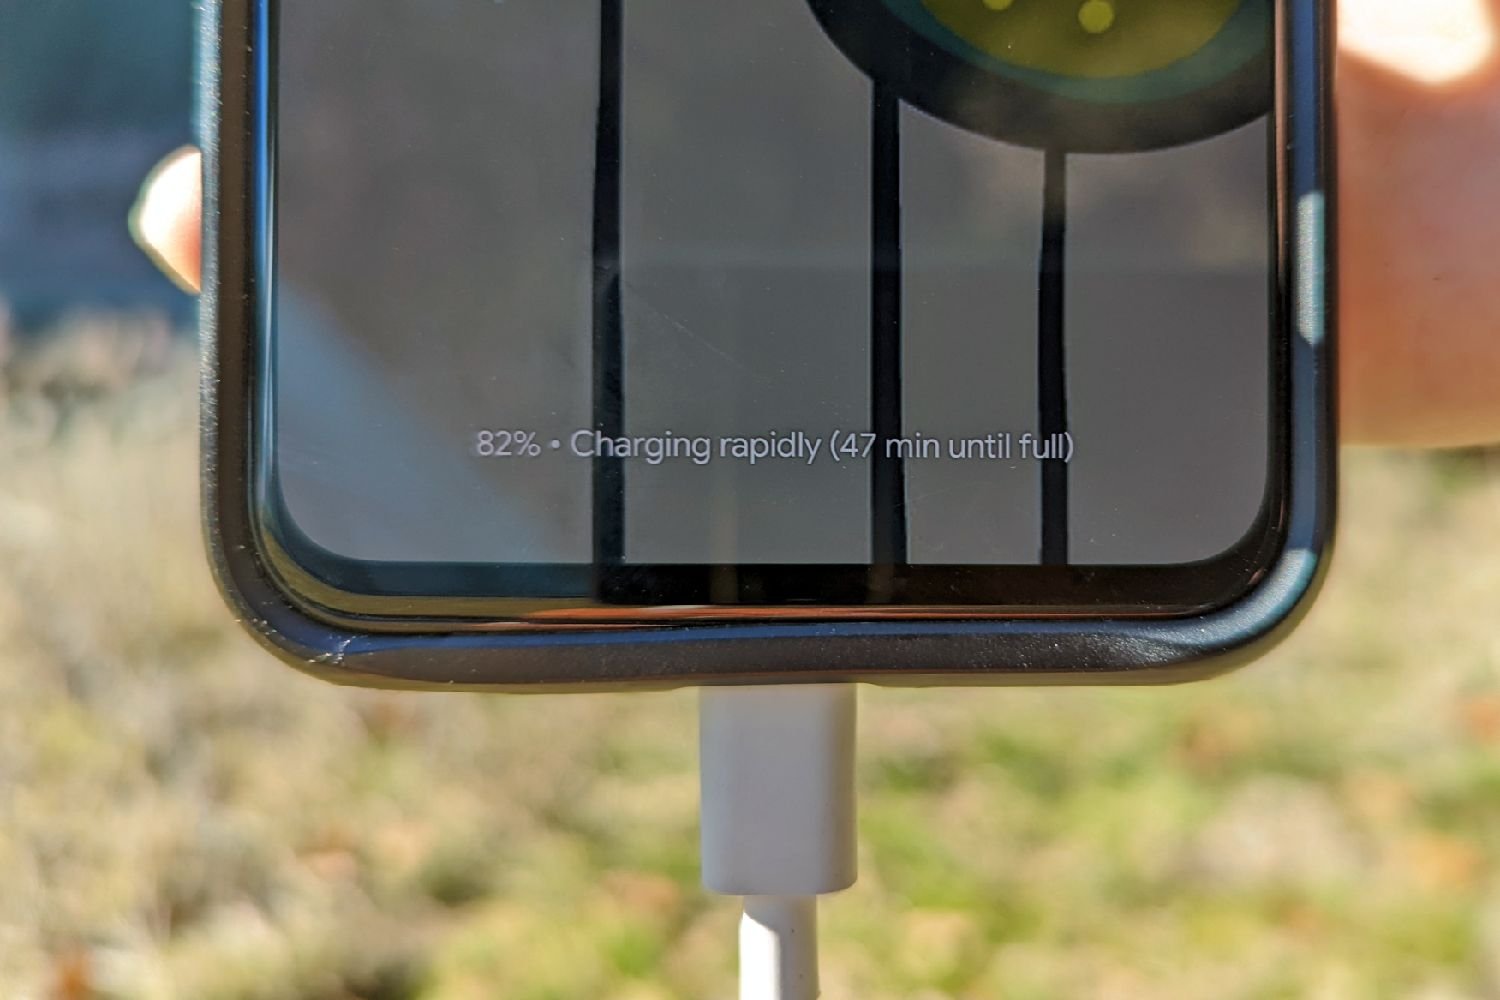 A close up of a cell phone screen showing that it is charging rapidly